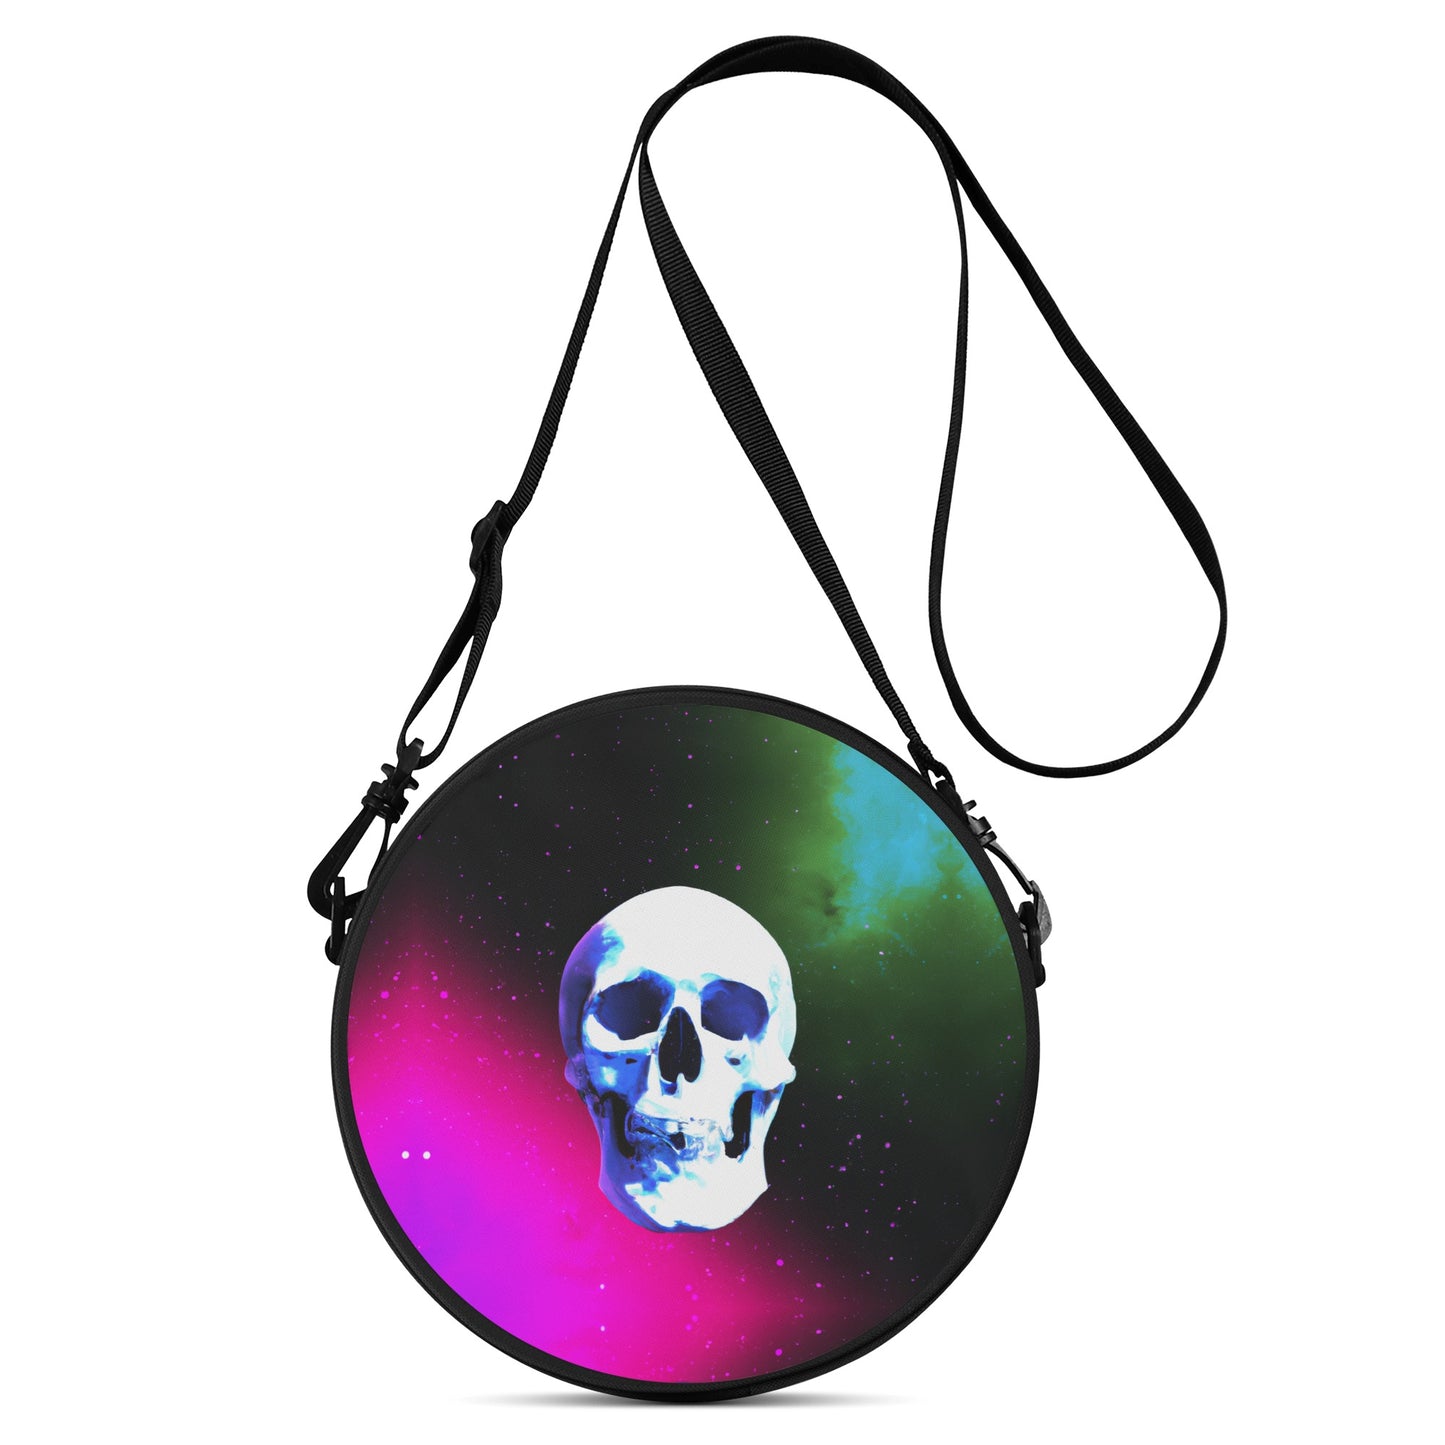 This cool round satchel bag has a vibrant digitally printed design.  Featuring a skull in a cool nebula space scene.